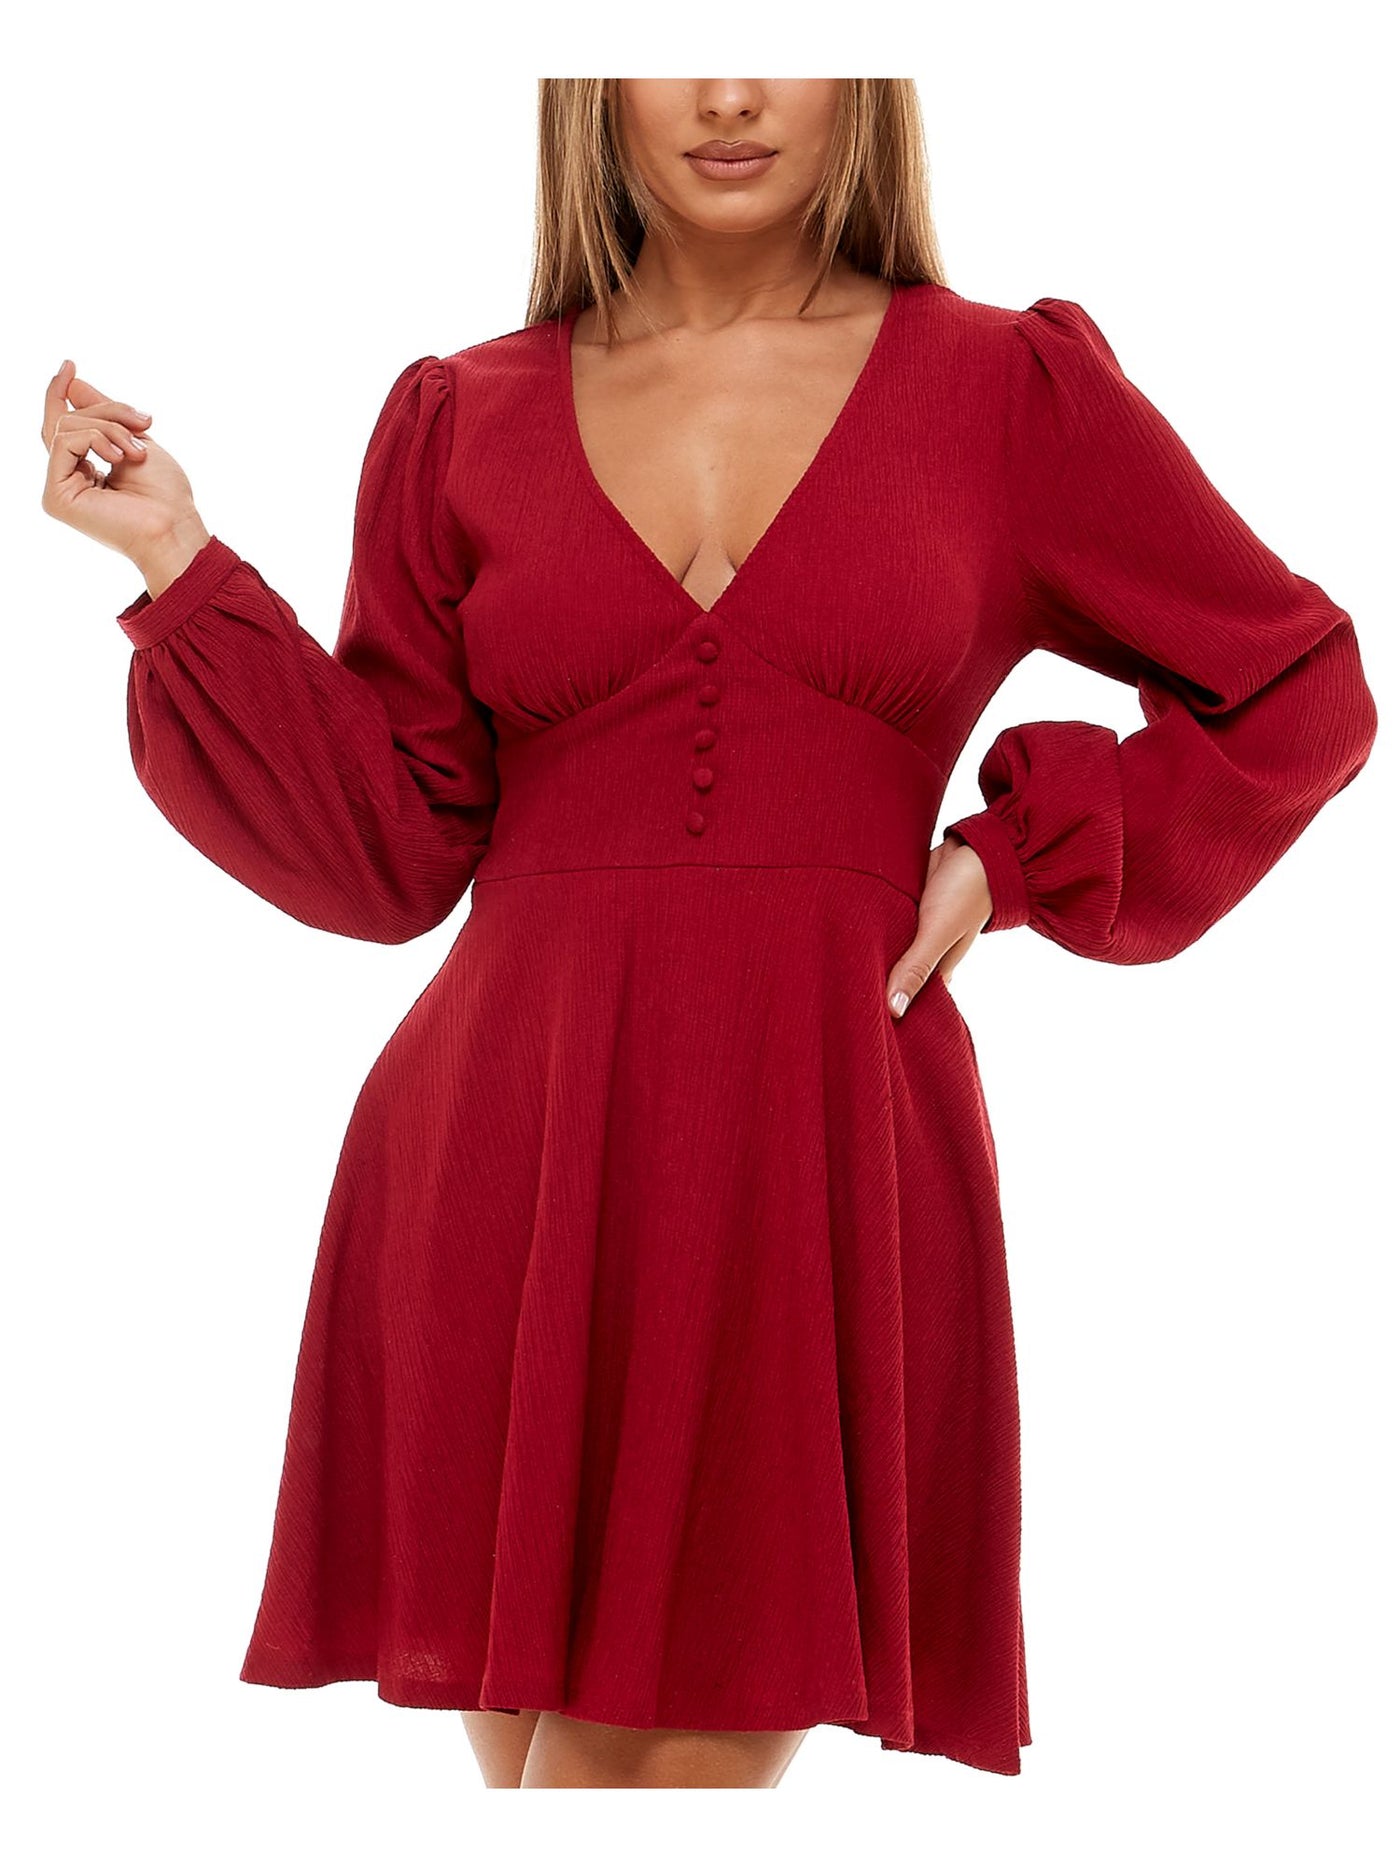 B DARLIN Womens Red Stretch Pleated Textured Button Lined Long Sleeve V Neck Mini Party Fit + Flare Dress Juniors 9\10